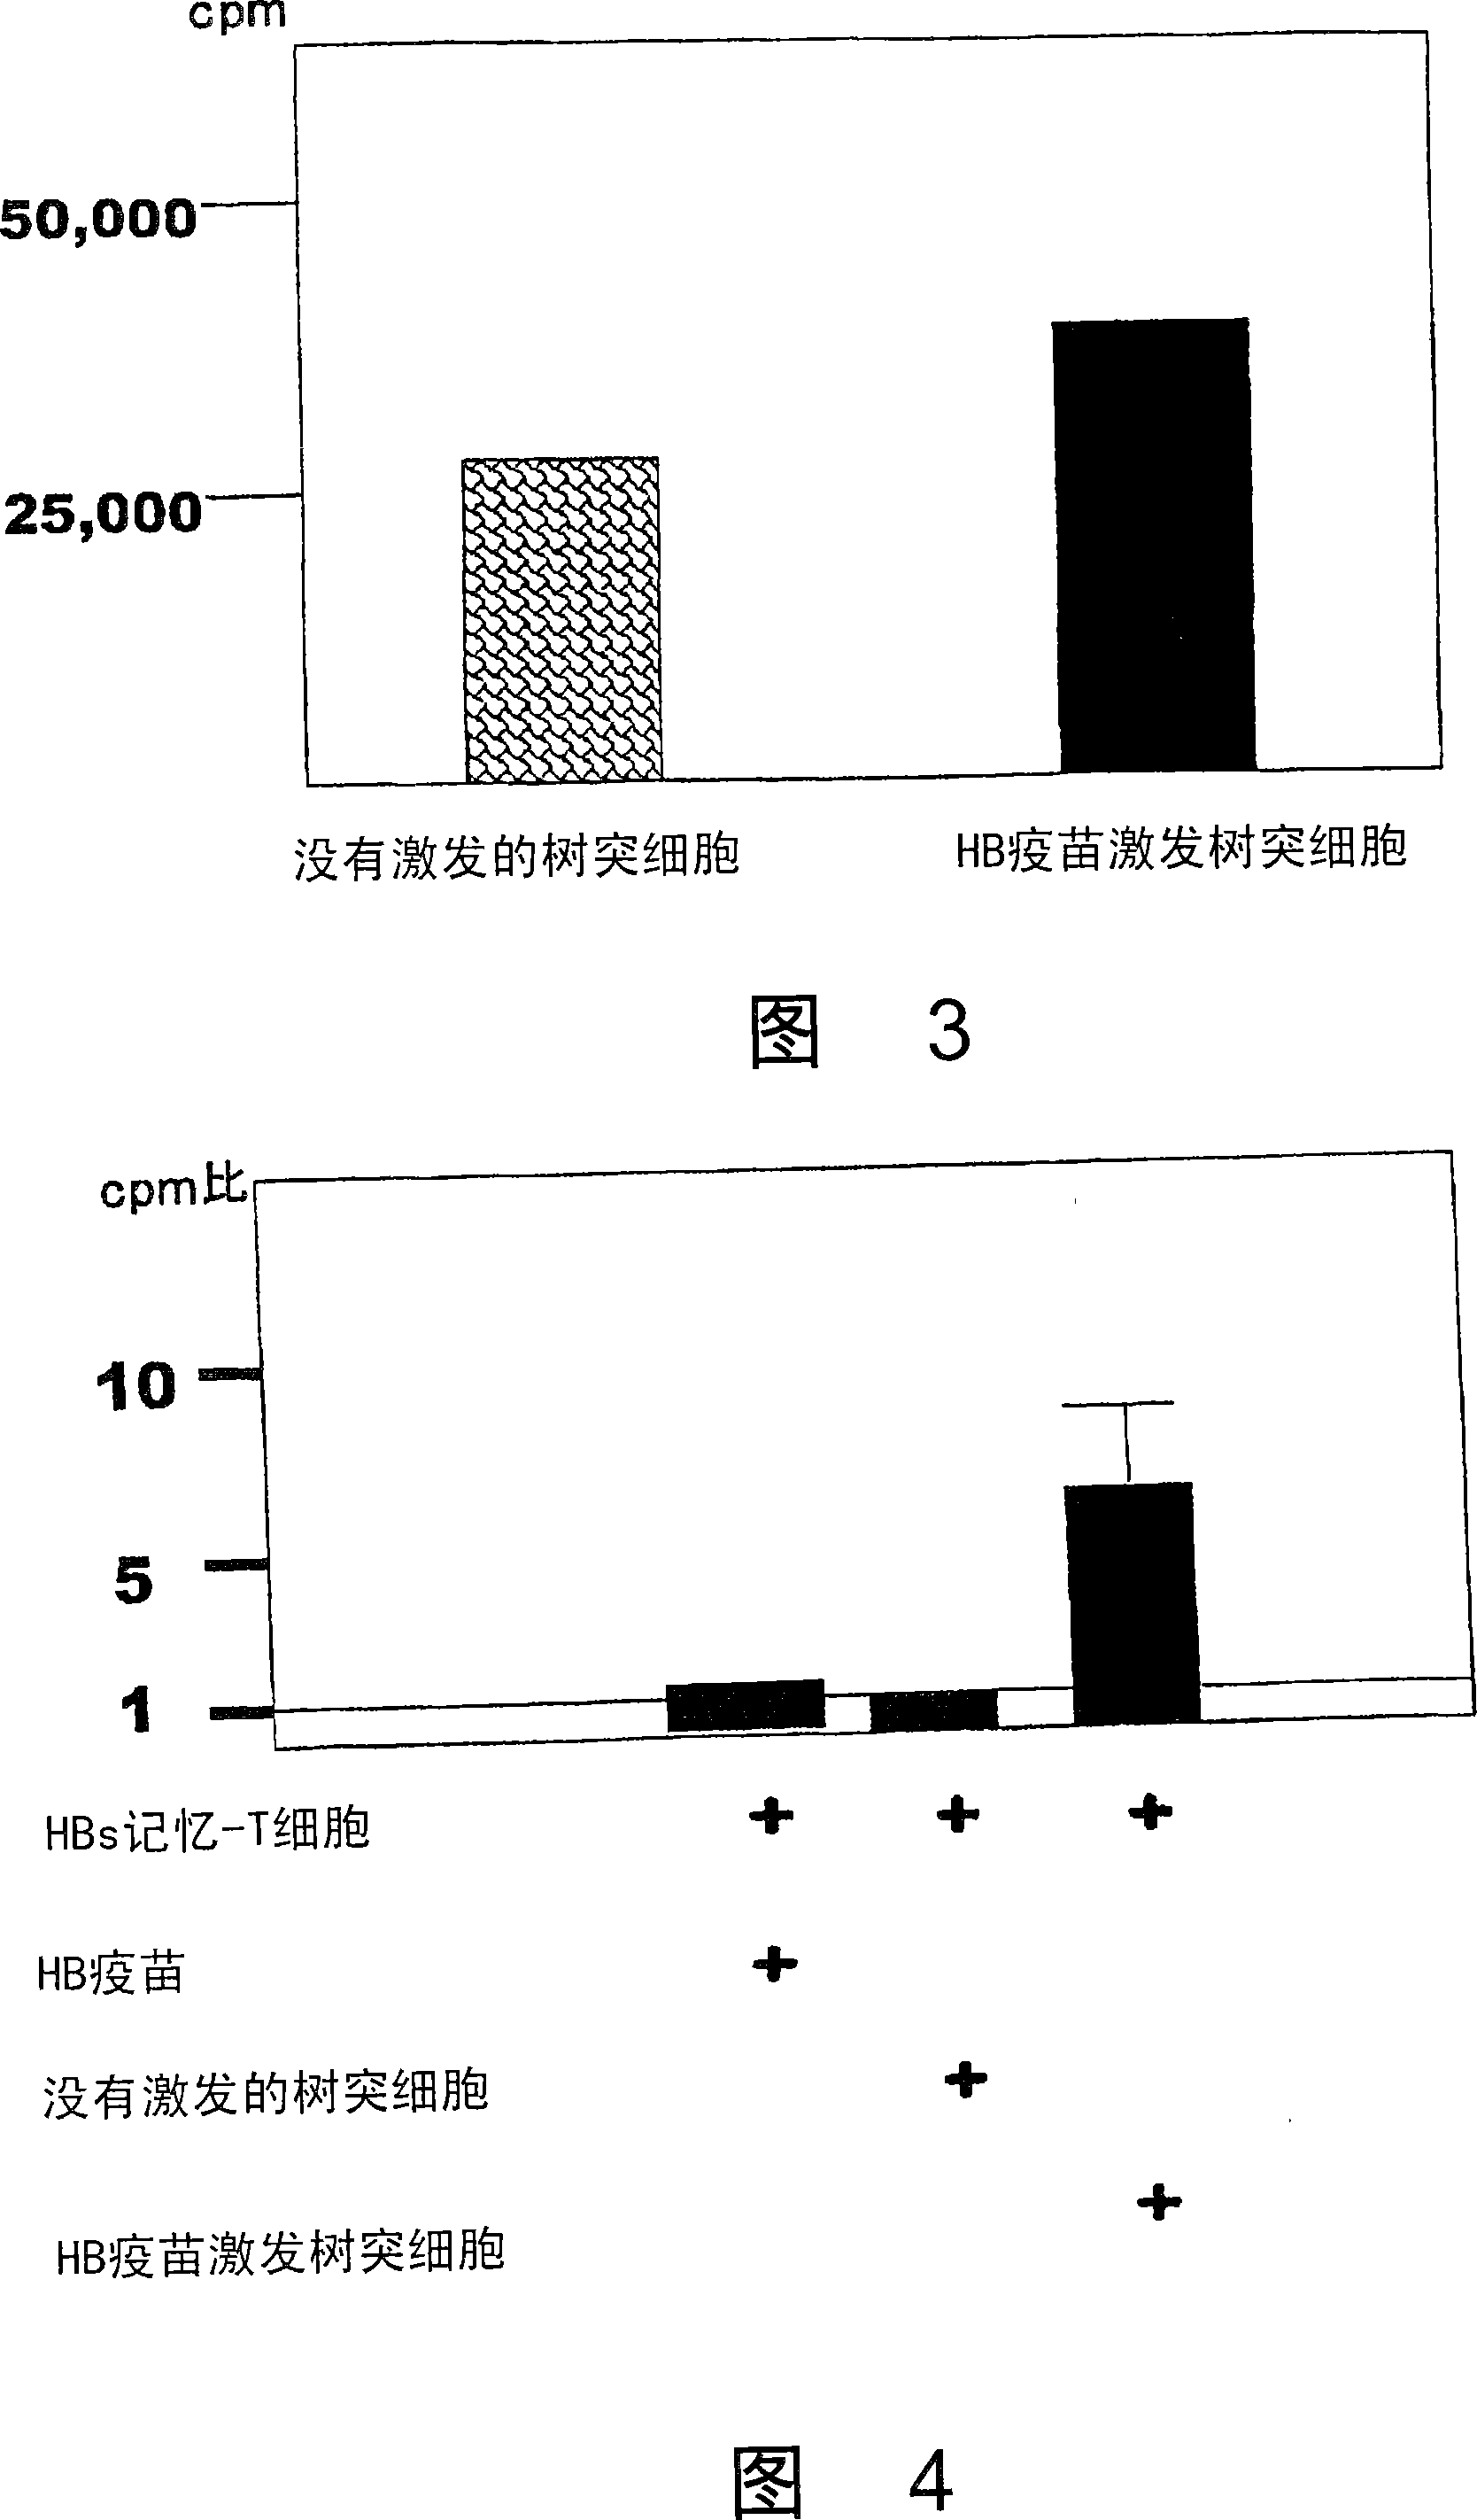 Dendritic cell obtained by antigen pulsing